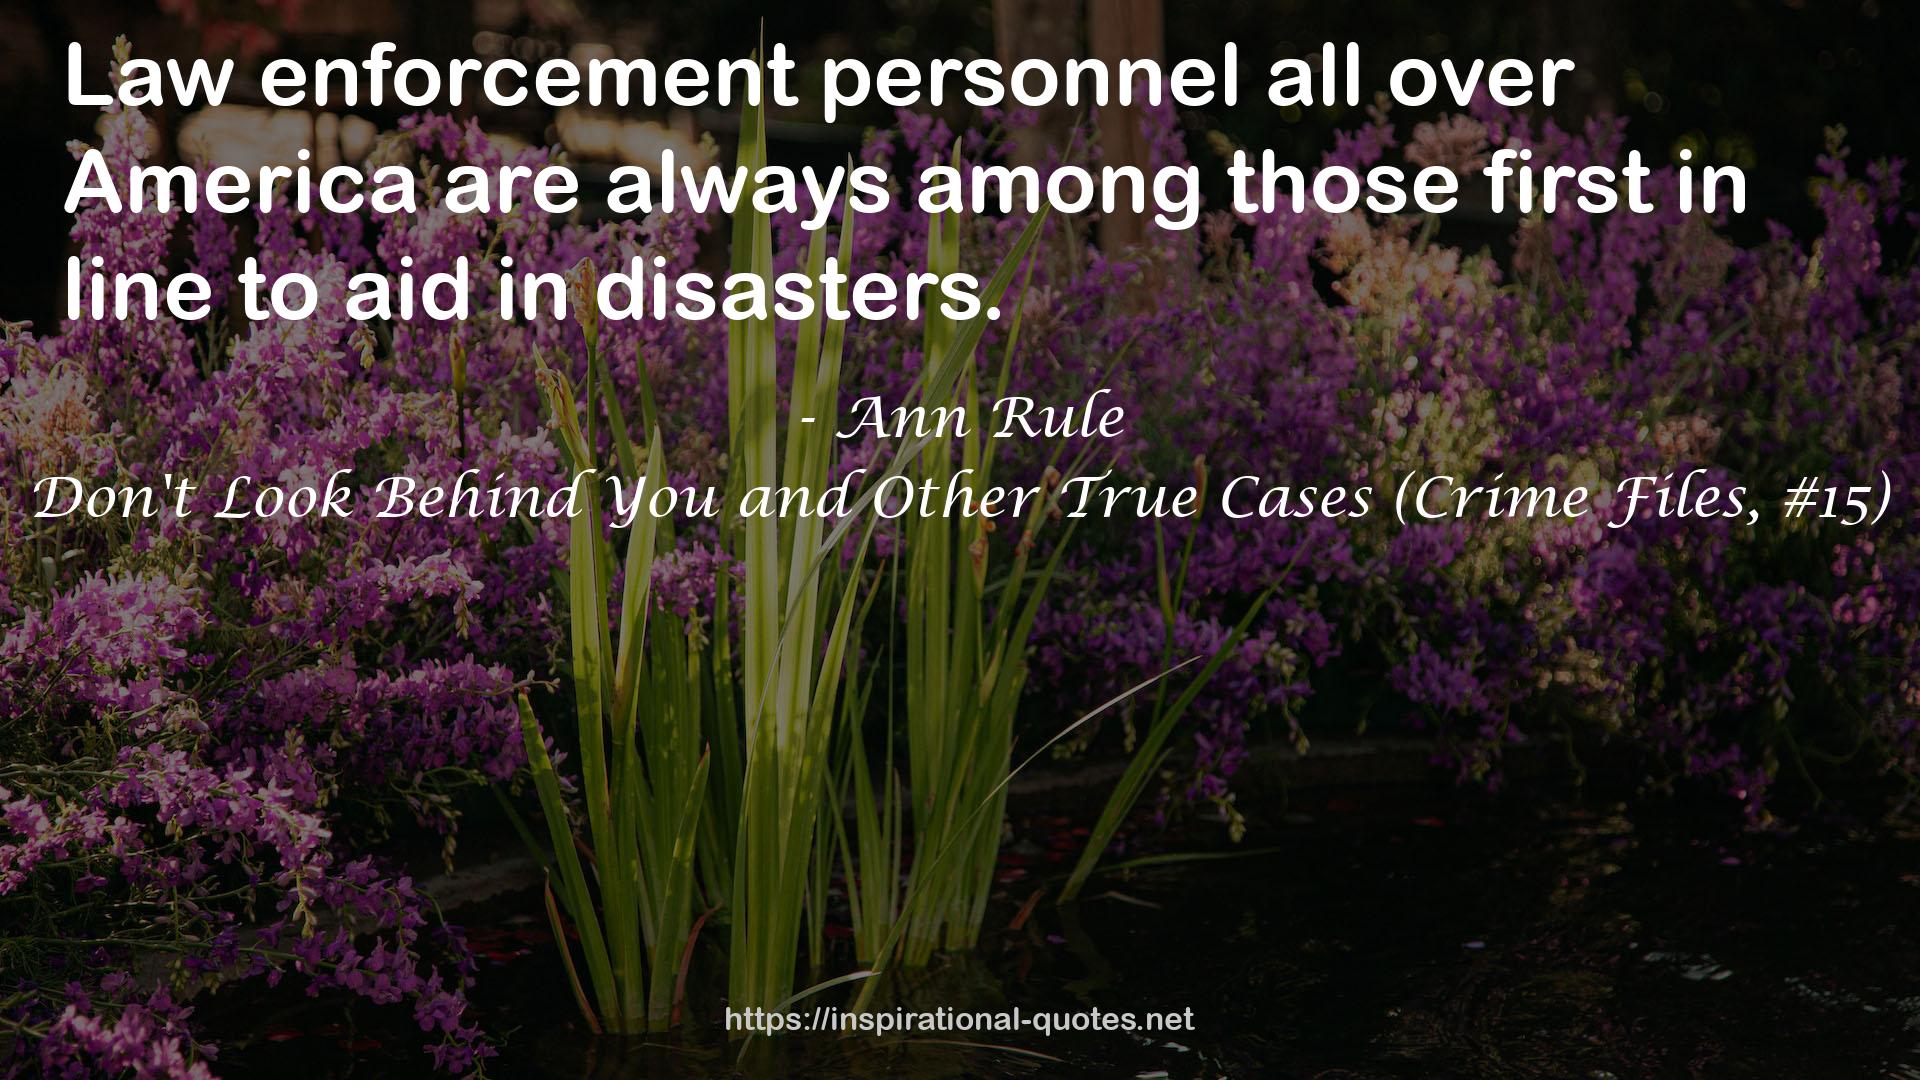 Don't Look Behind You and Other True Cases (Crime Files, #15) QUOTES